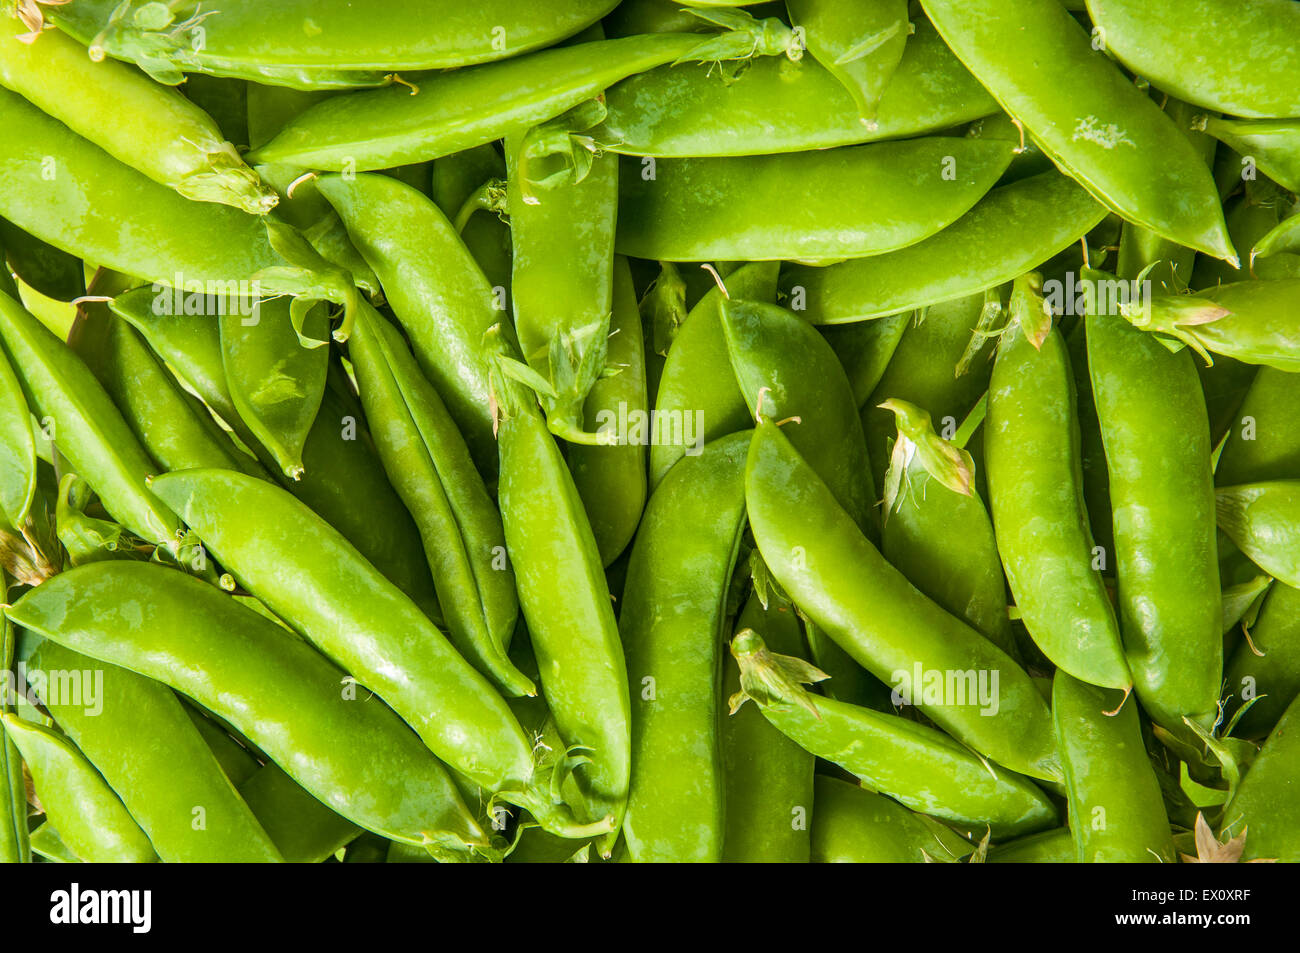 Abstract background of young green peas in the pod Stock Photo